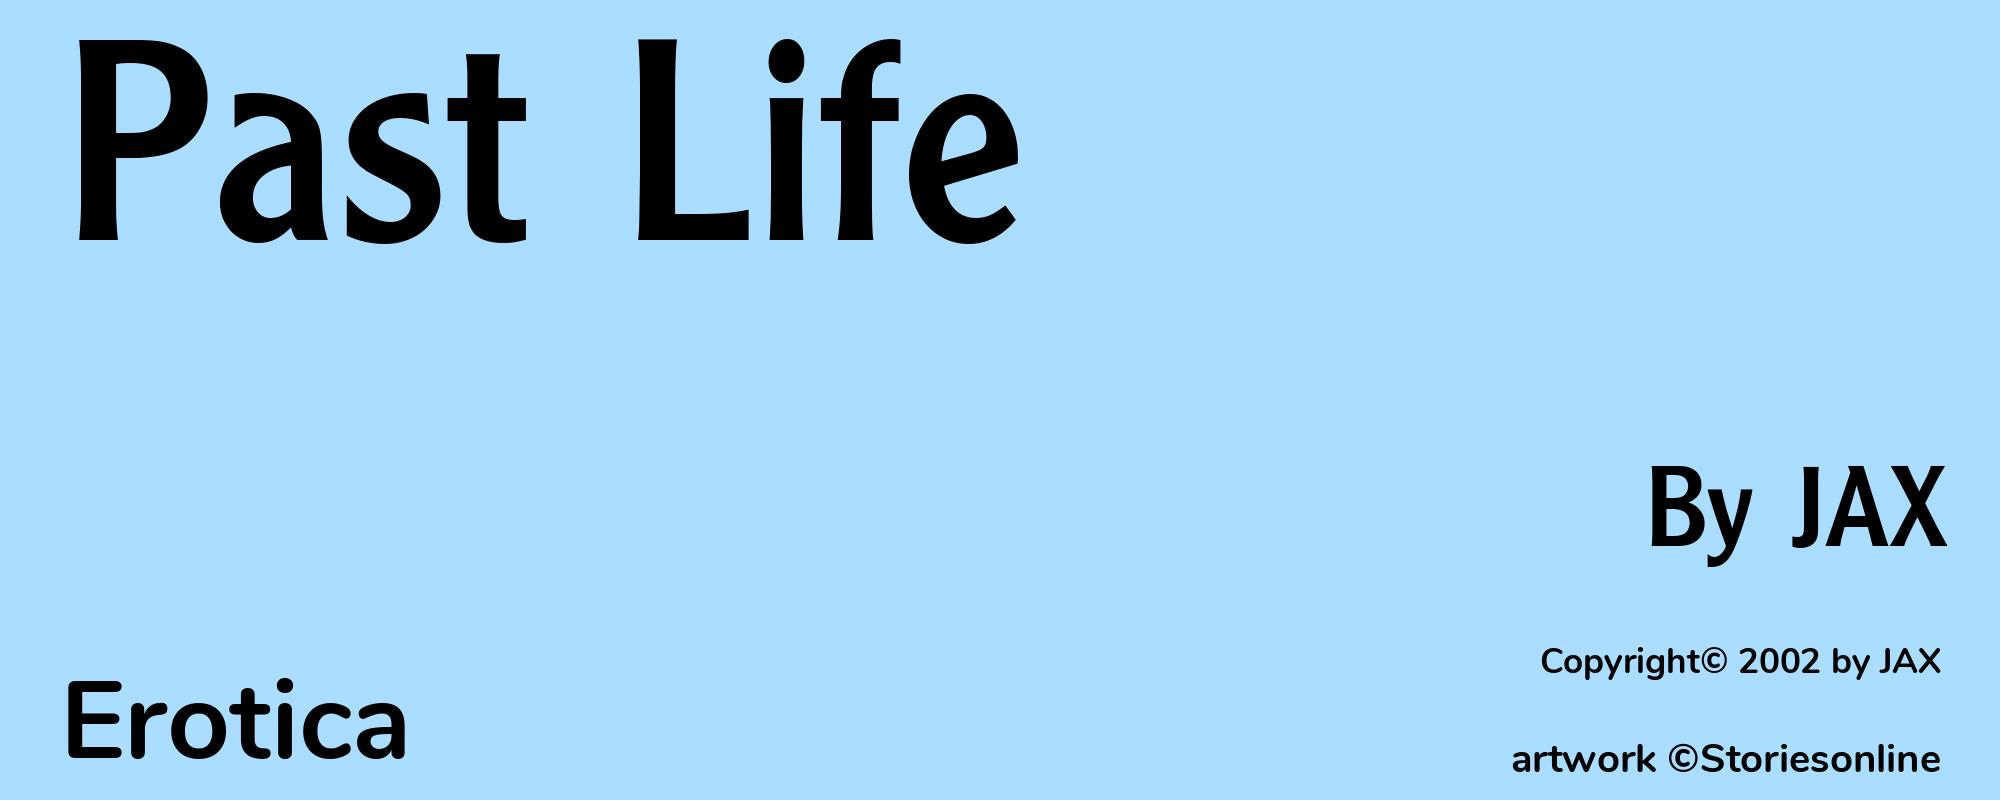 Past Life - Cover